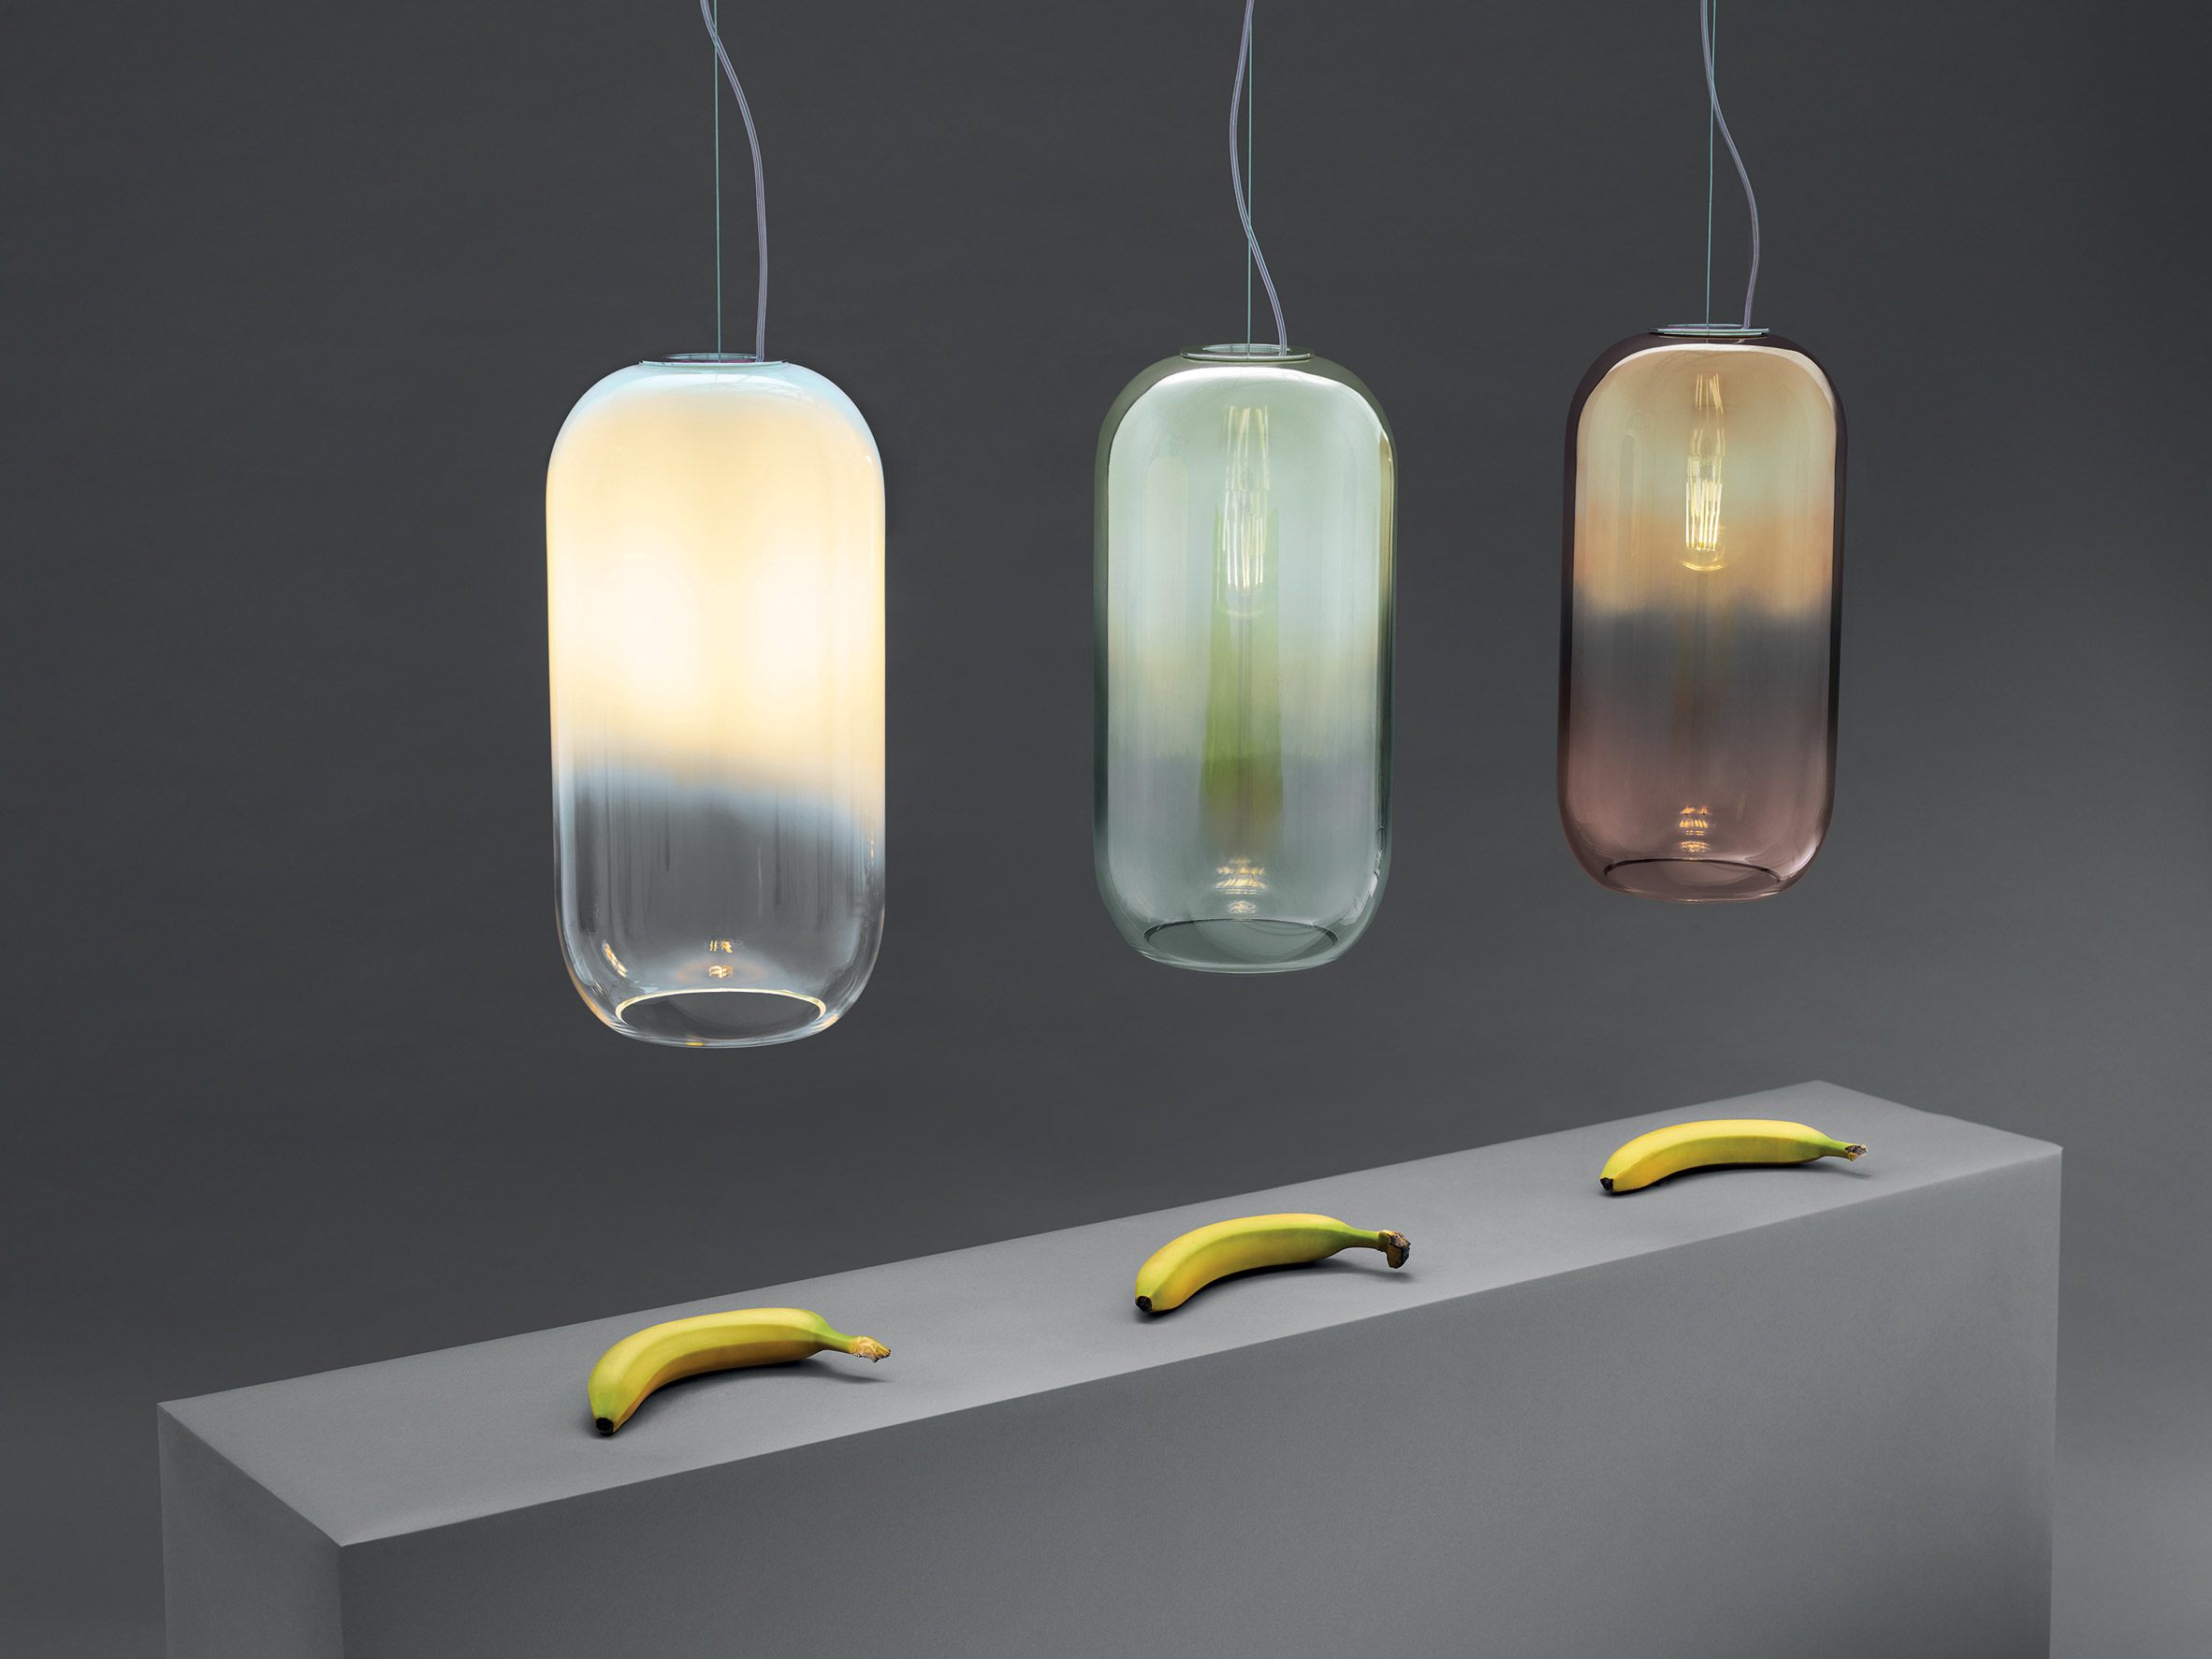 BIG and Artemide create a lamp that helps plants grow indoors